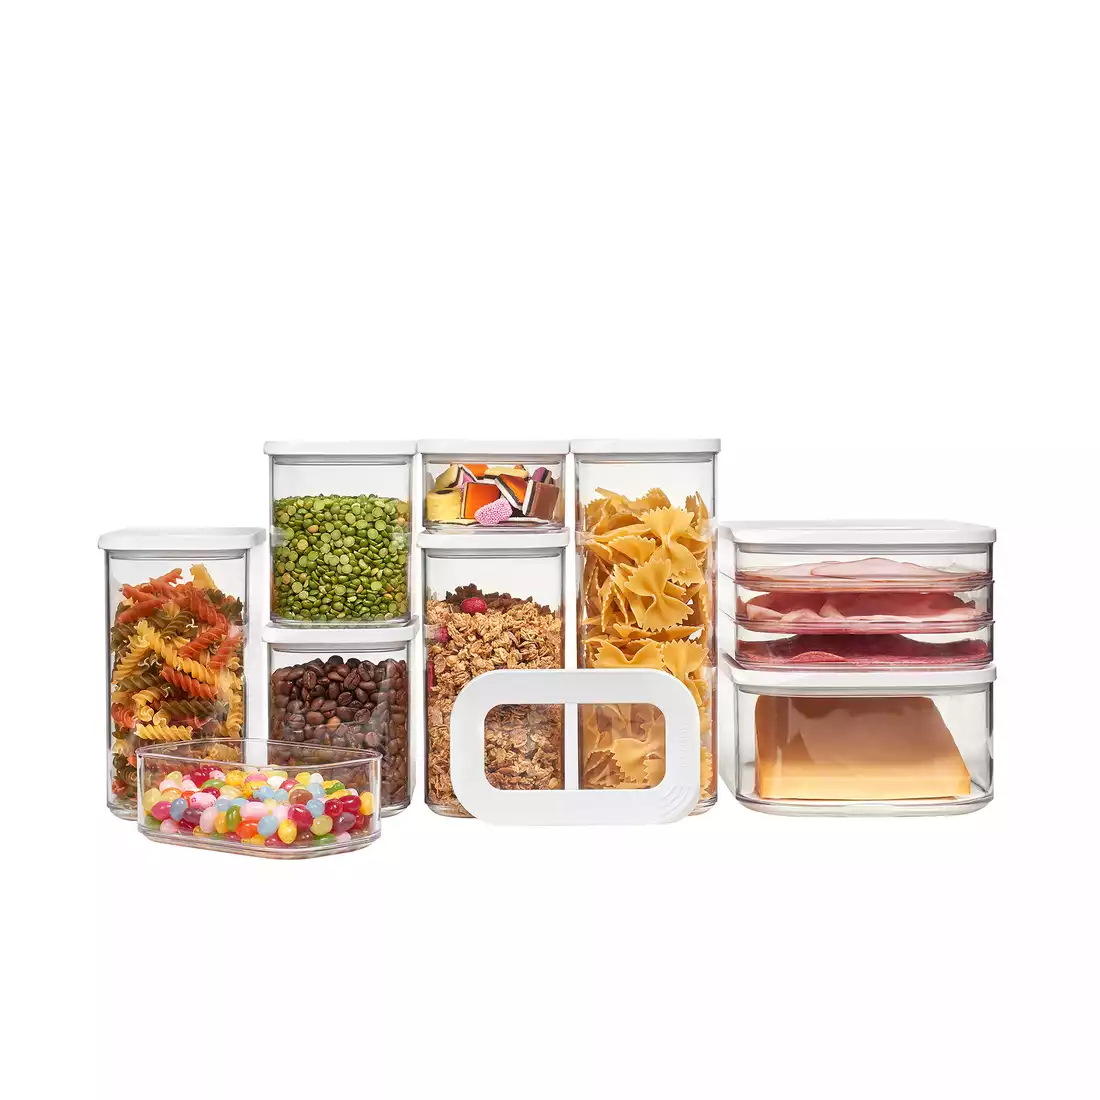 MEPAL MODULA set of 9 food containers limited edition, white